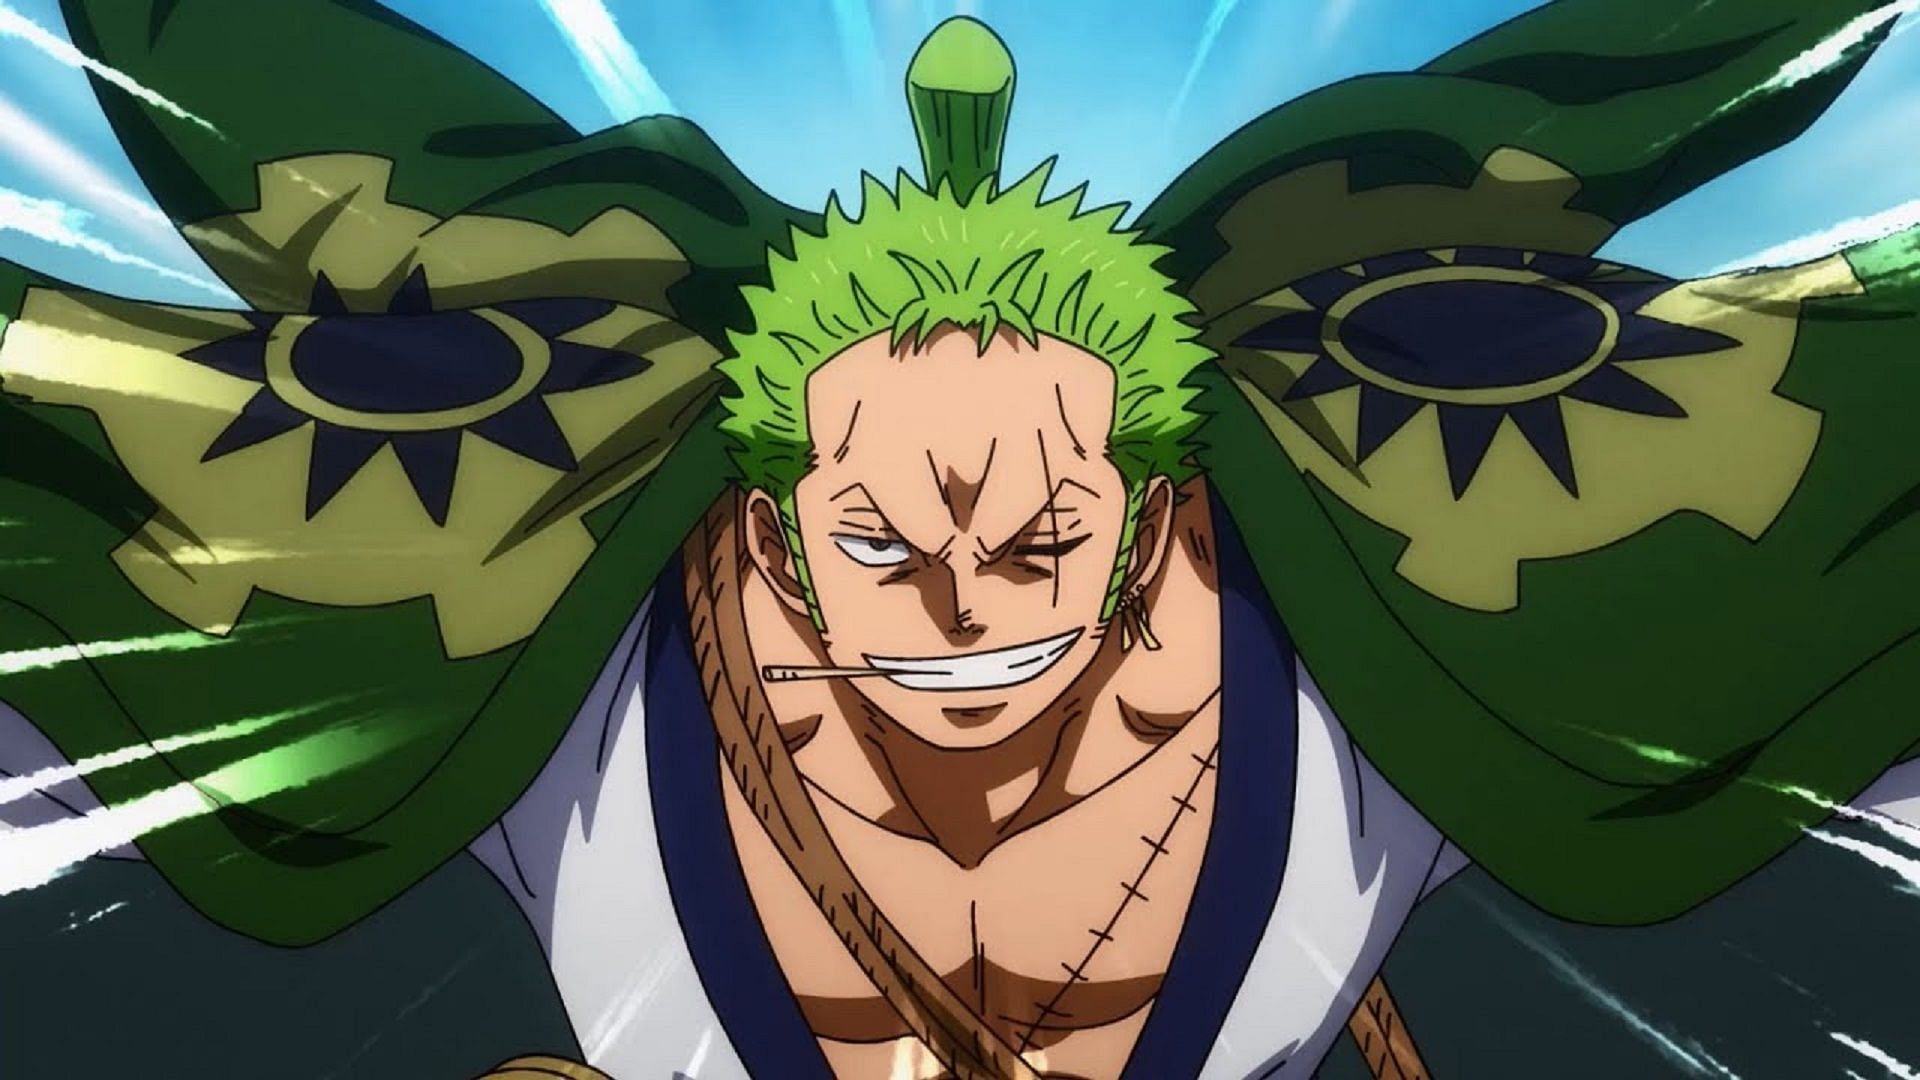 Zoro in his Wano outfit (Image via Toei Animation, One Piece)